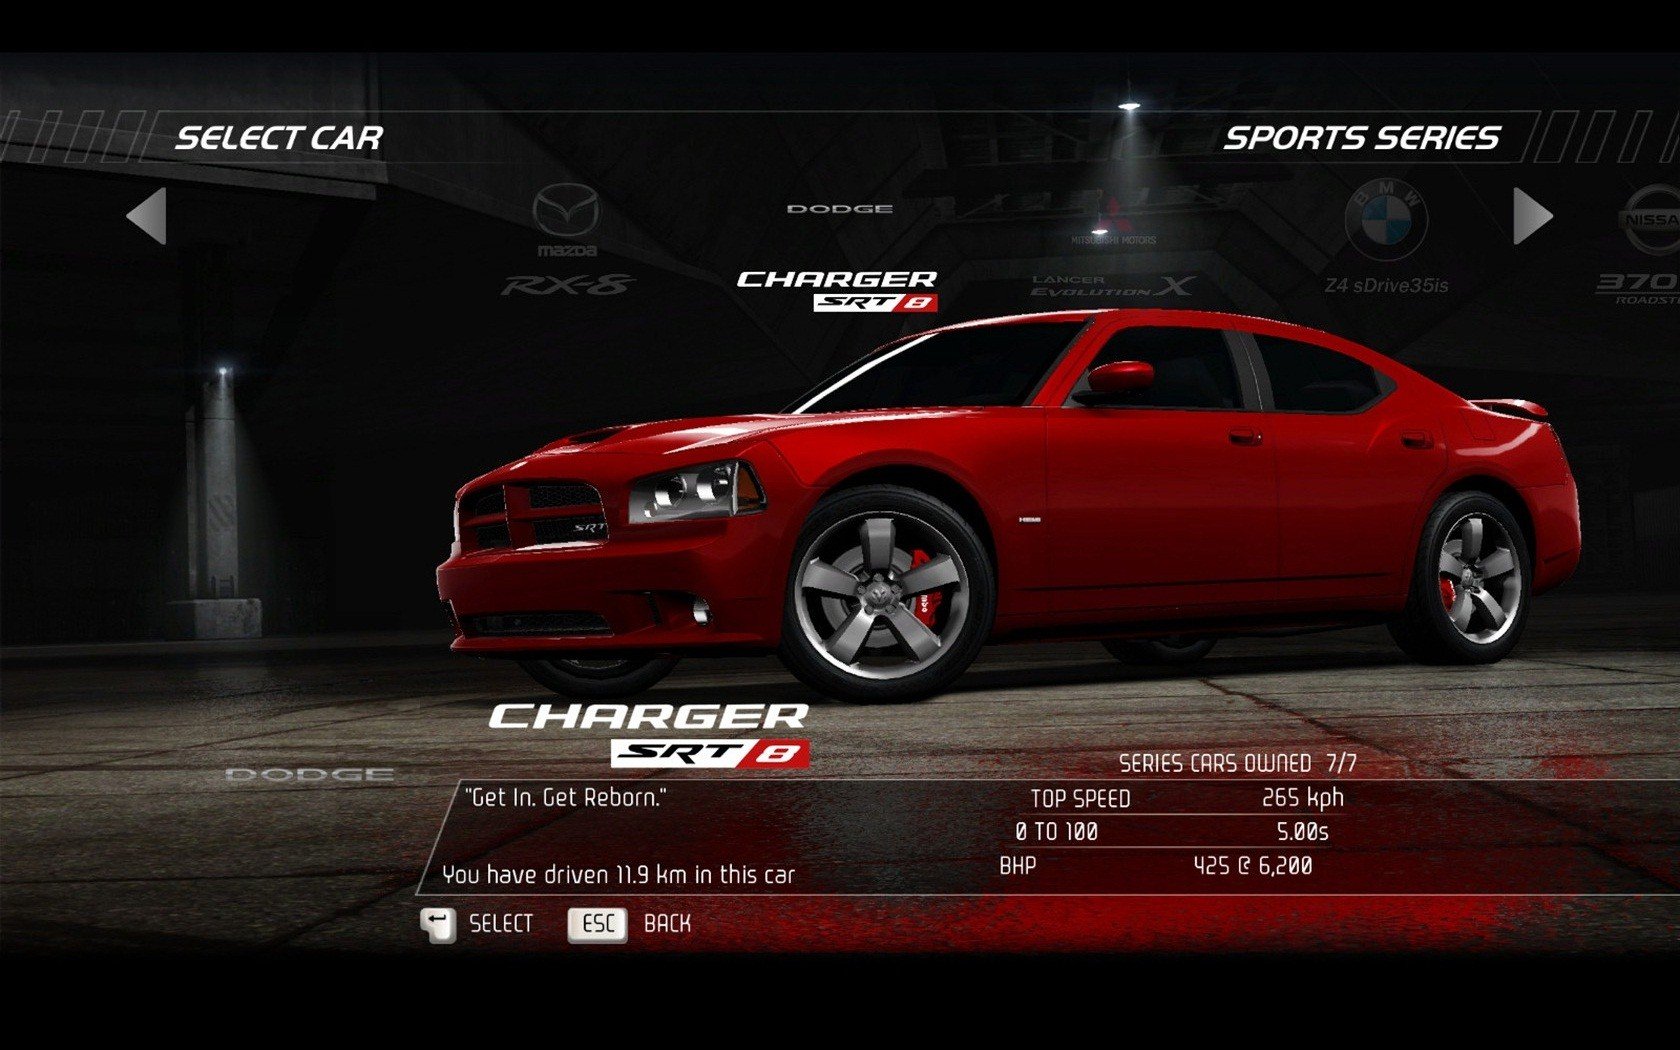 video, Games, Cars, Dodge, Charger, Need, For, Speed, Hot, Pursuit, Srt 8, Pc, Games Wallpaper